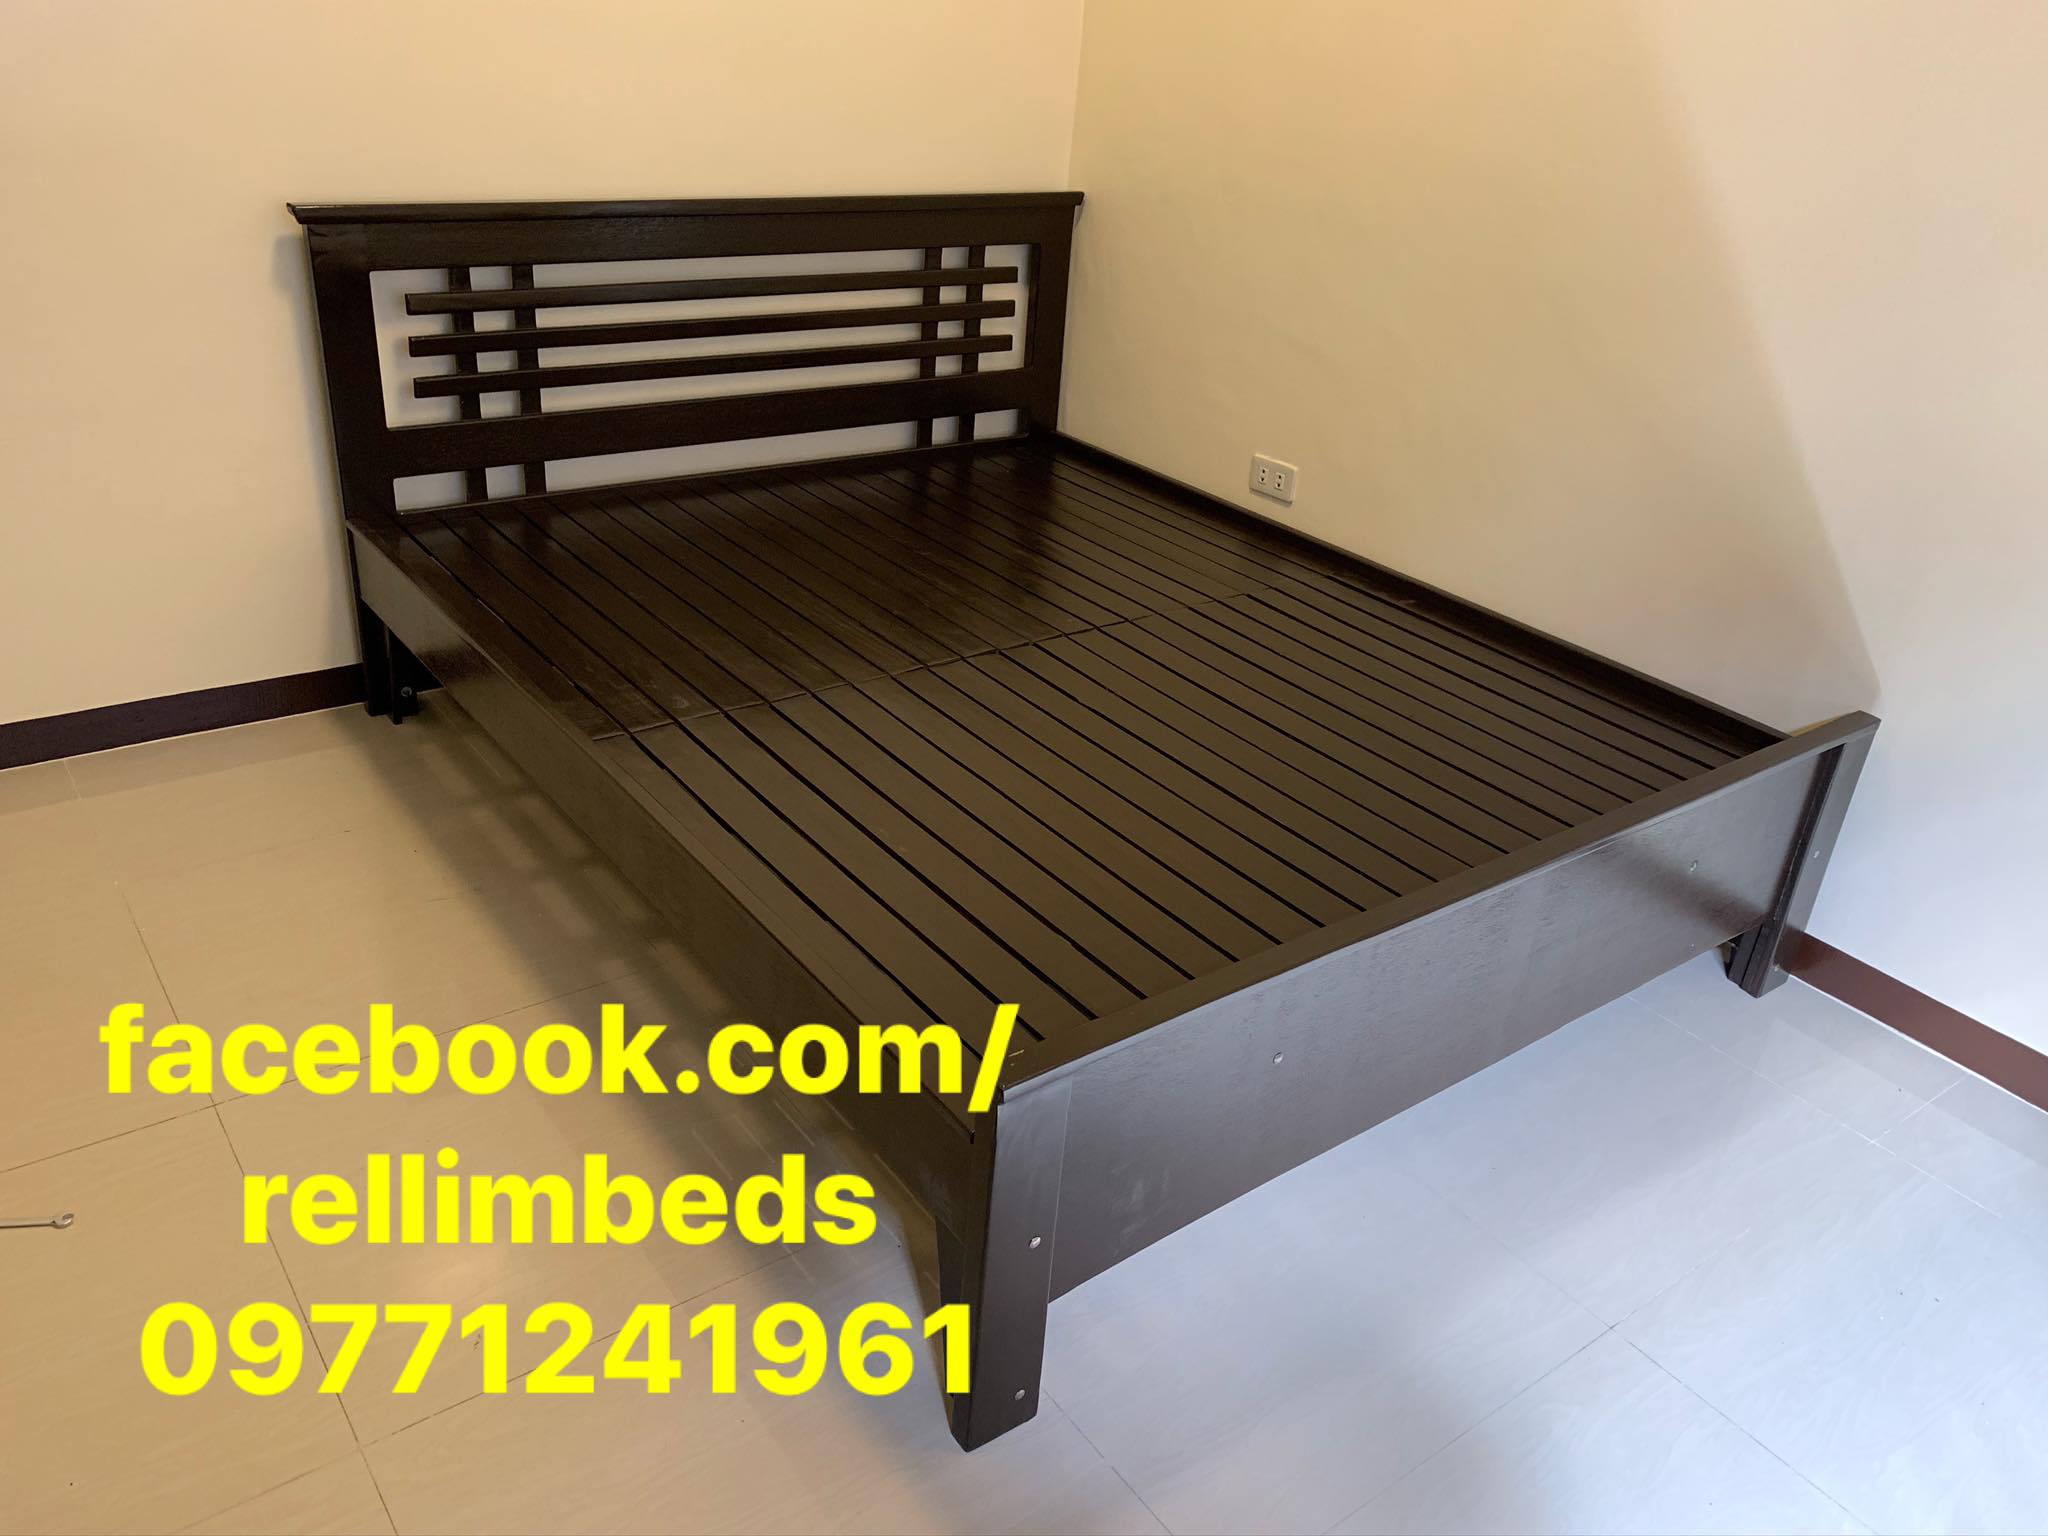 Bed Frame Queen 60x75 Lazada Ph, New Bed Frame Queen Size Philippines